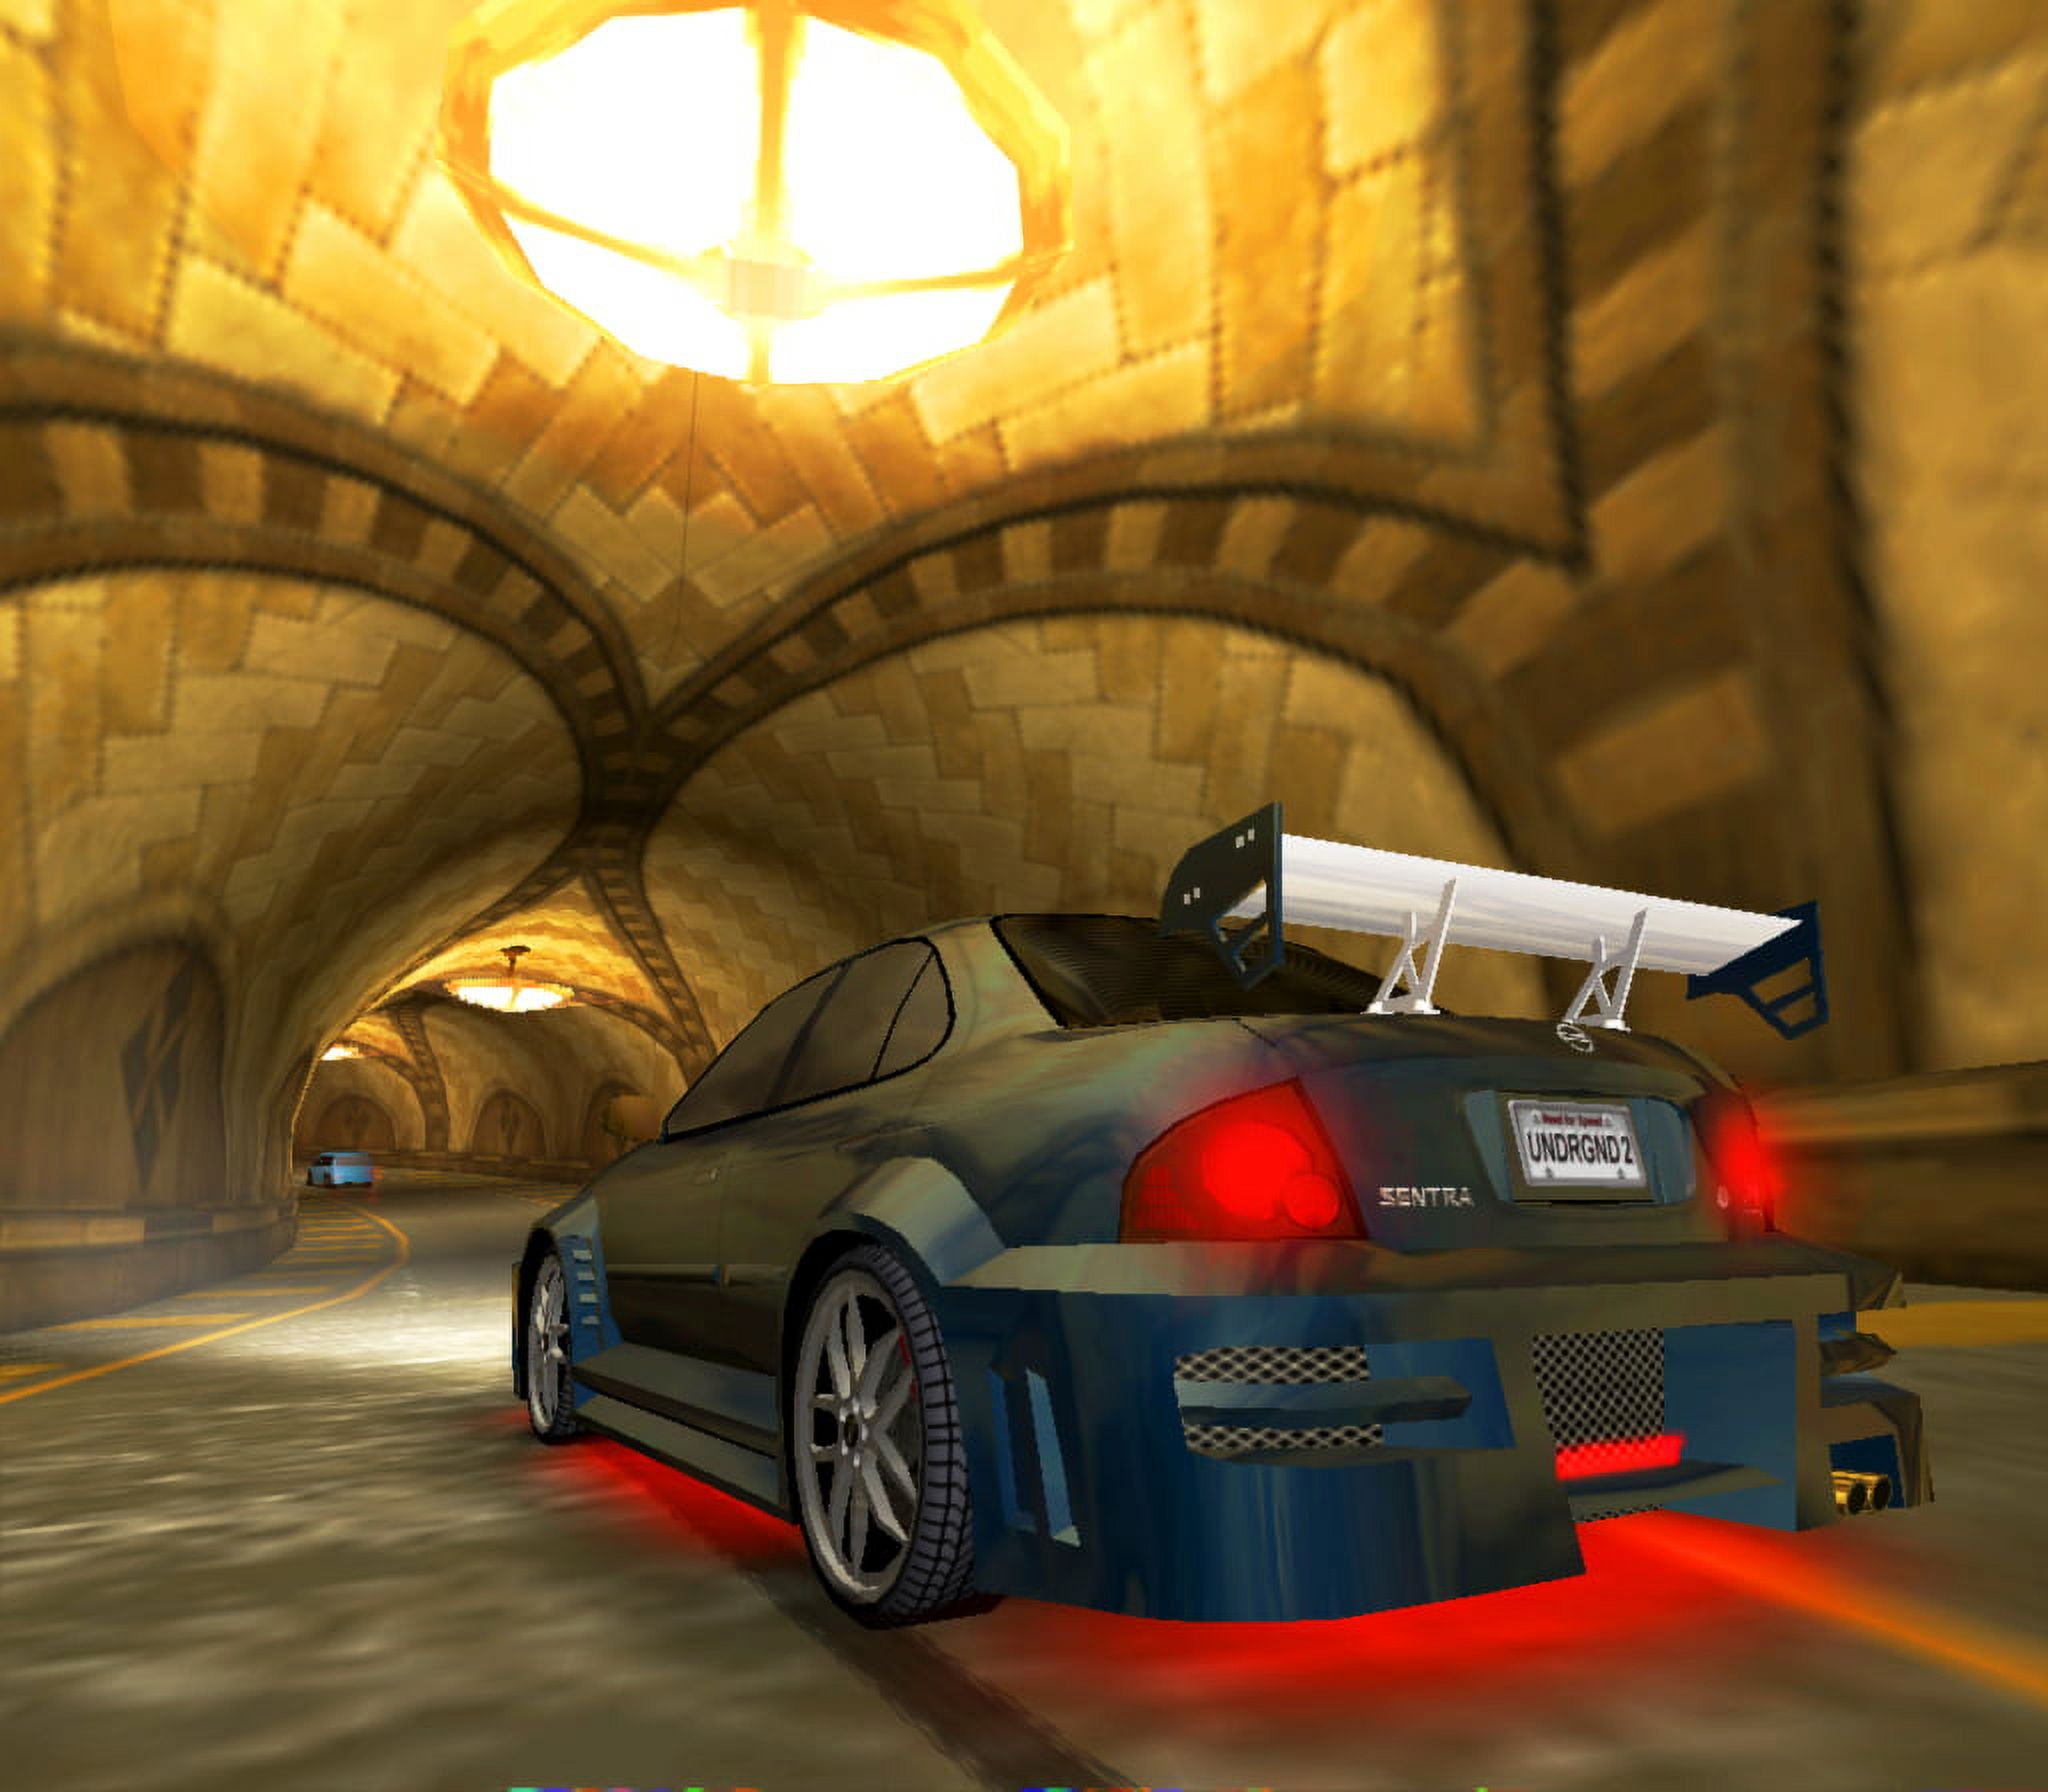 Need for Speed Underground 2, Electronic Arts, PlayStation 2